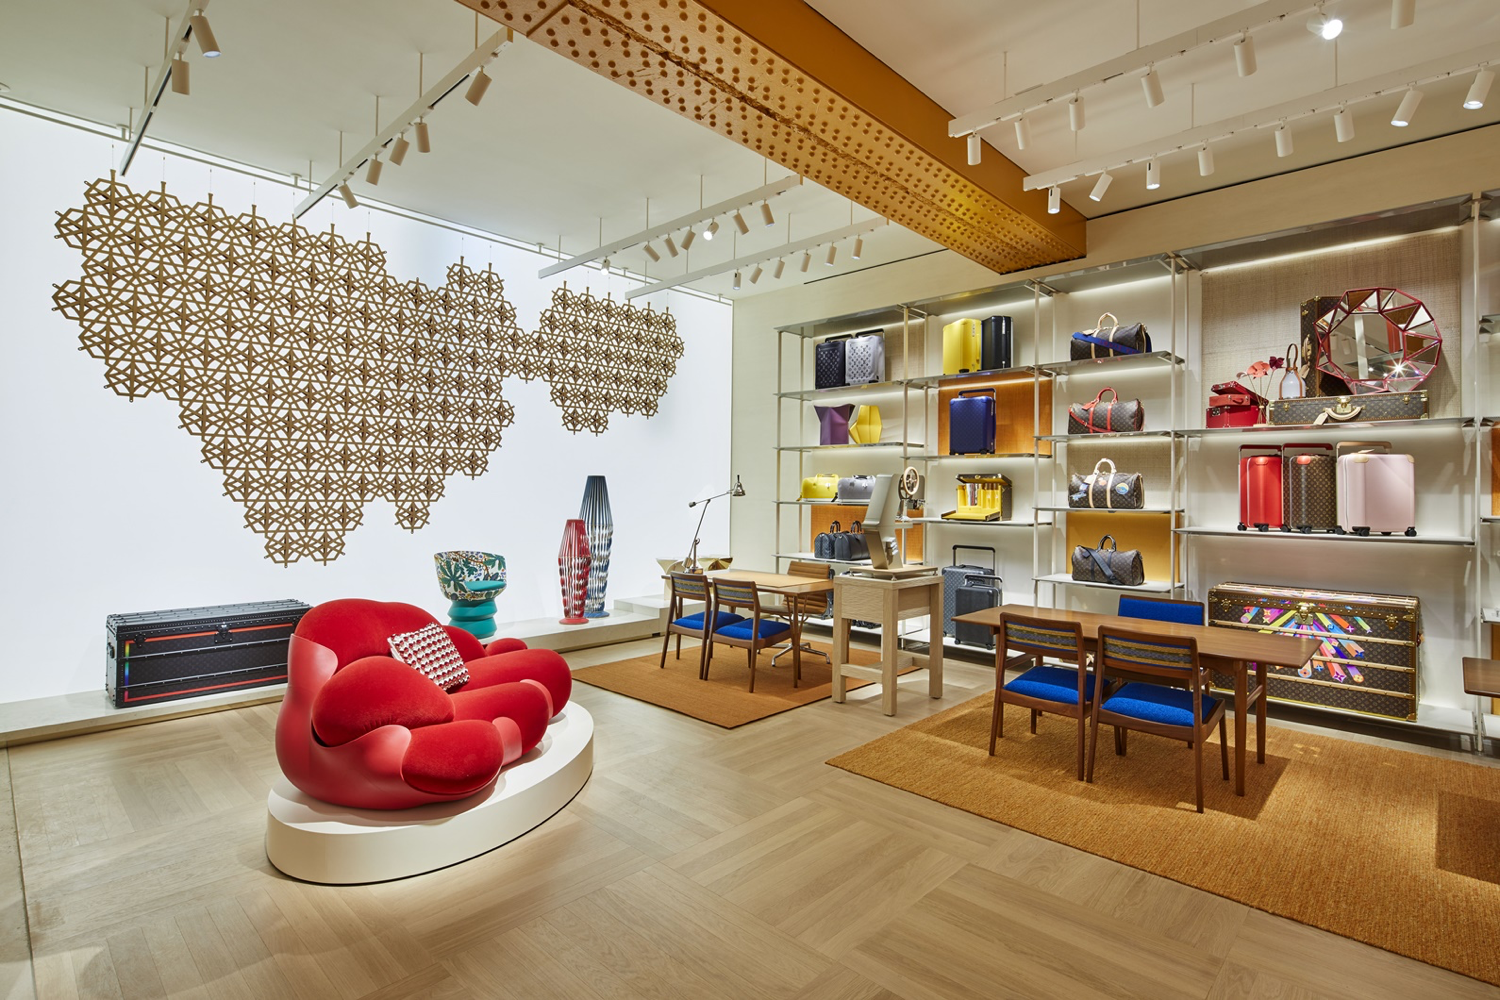 Louis Vuitton's New Bond Street Maison touted to be the most luxurious LV  store - Luxurylaunches